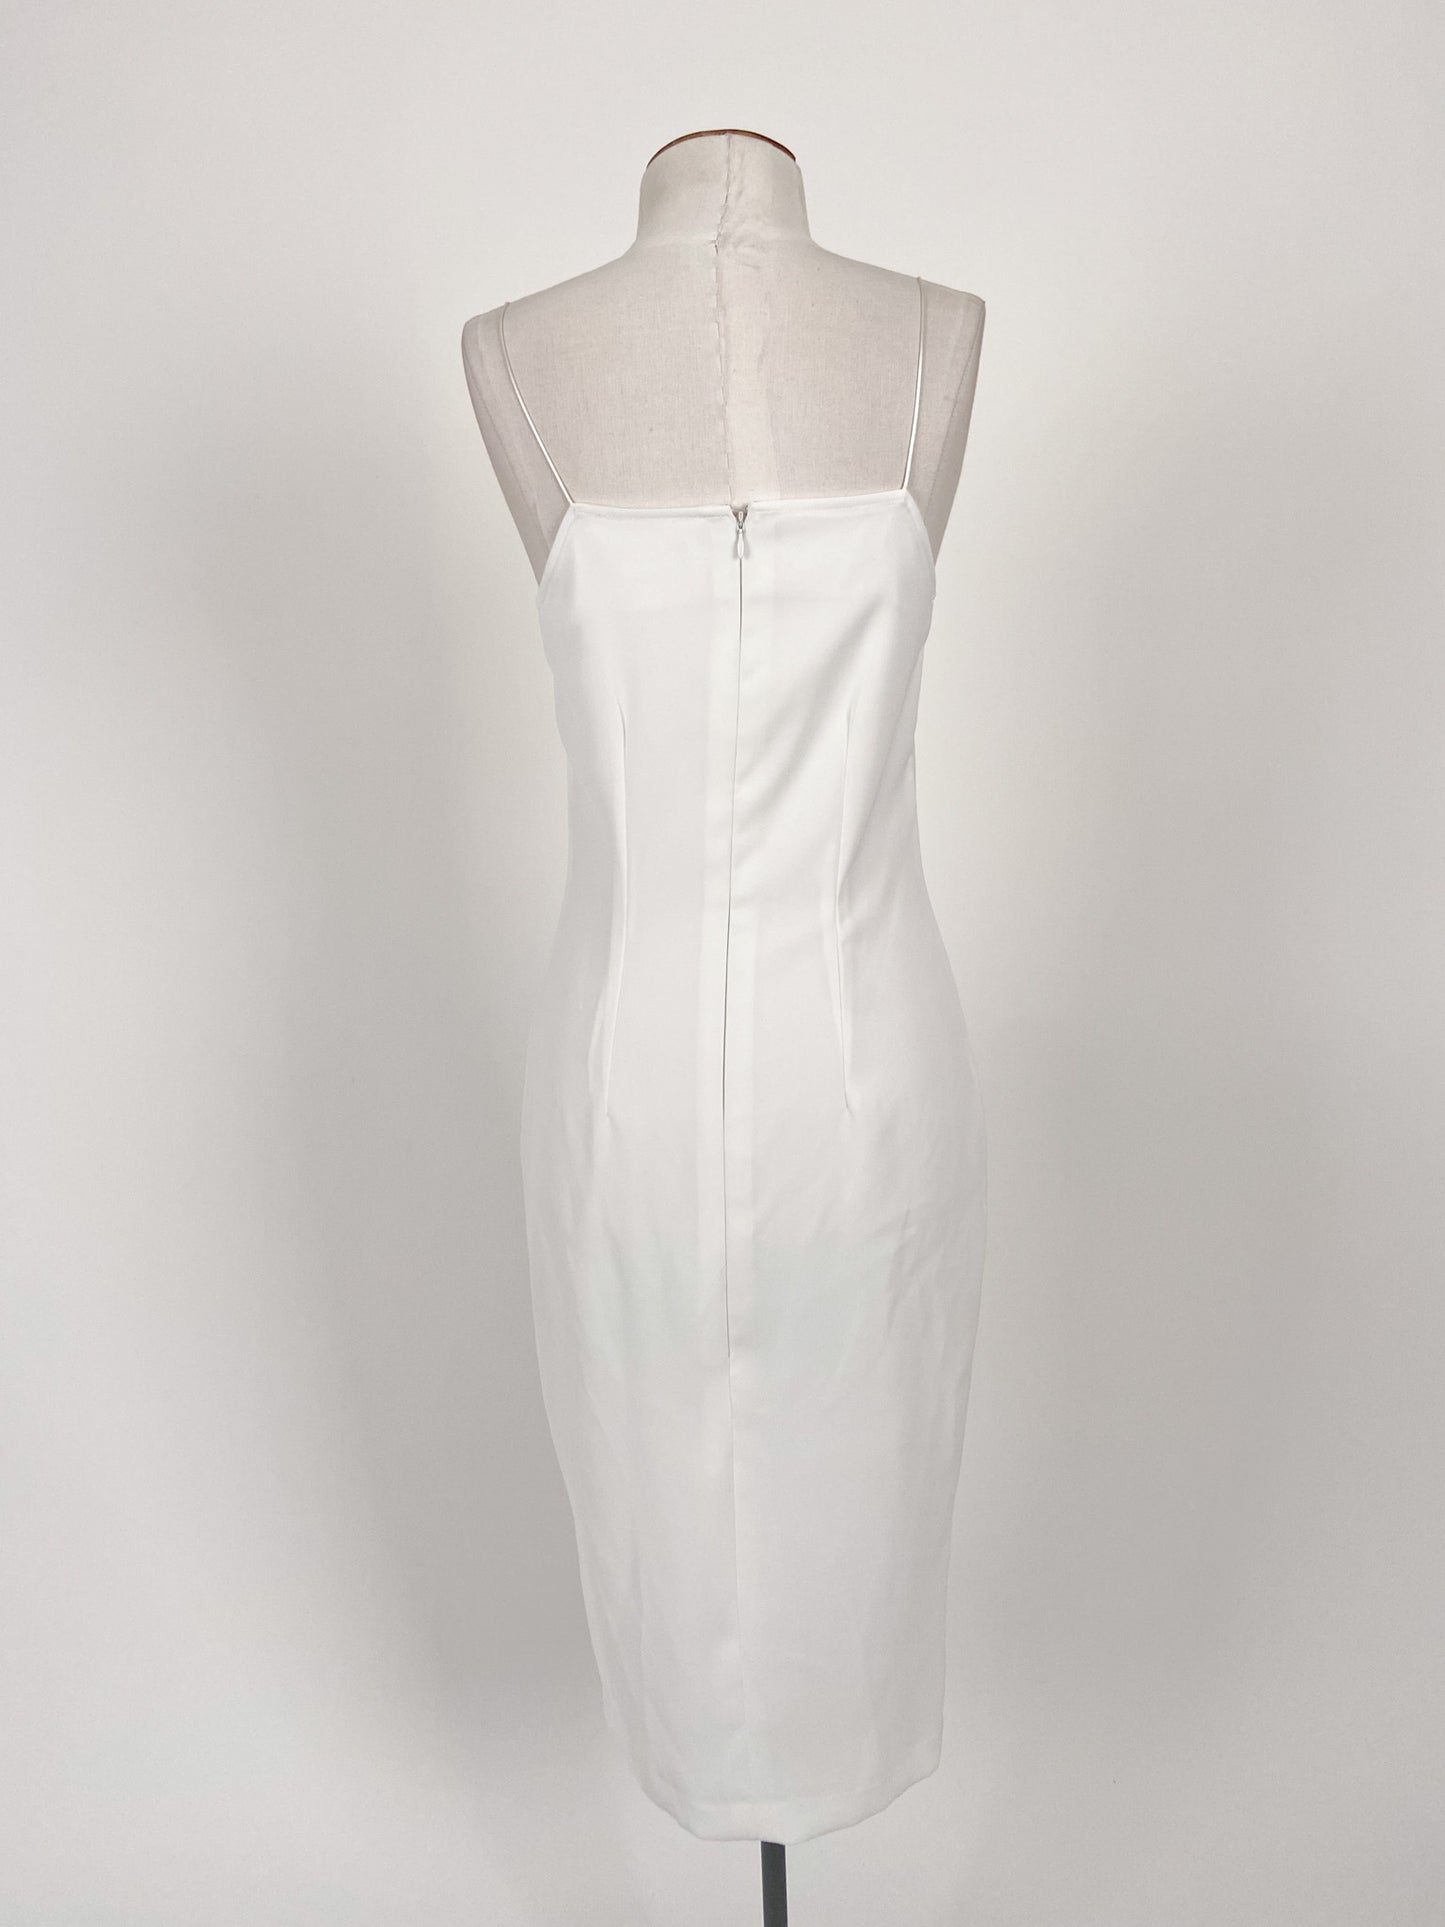 Maurie & Eve | White Casual/Cocktail Dress | Size 6